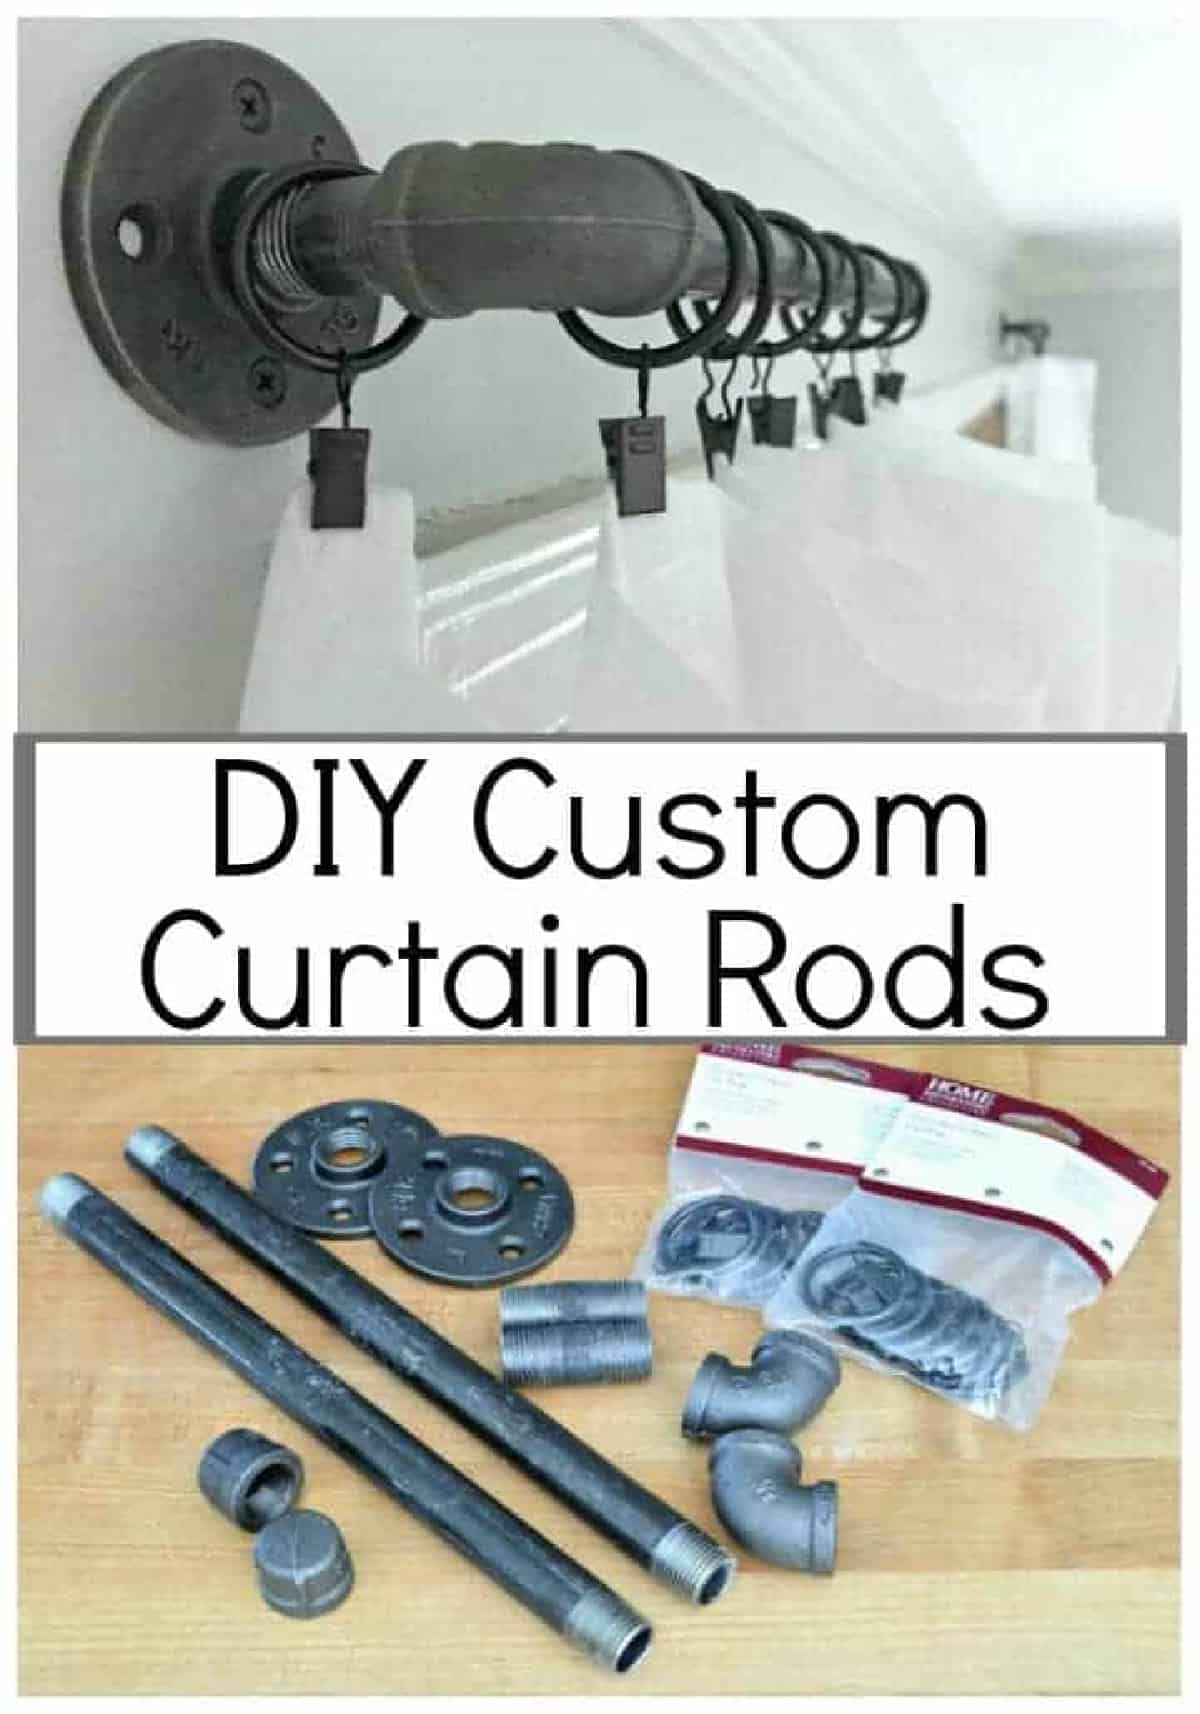 DIY curtain rods and supplies, plus a large Pinterest graphic